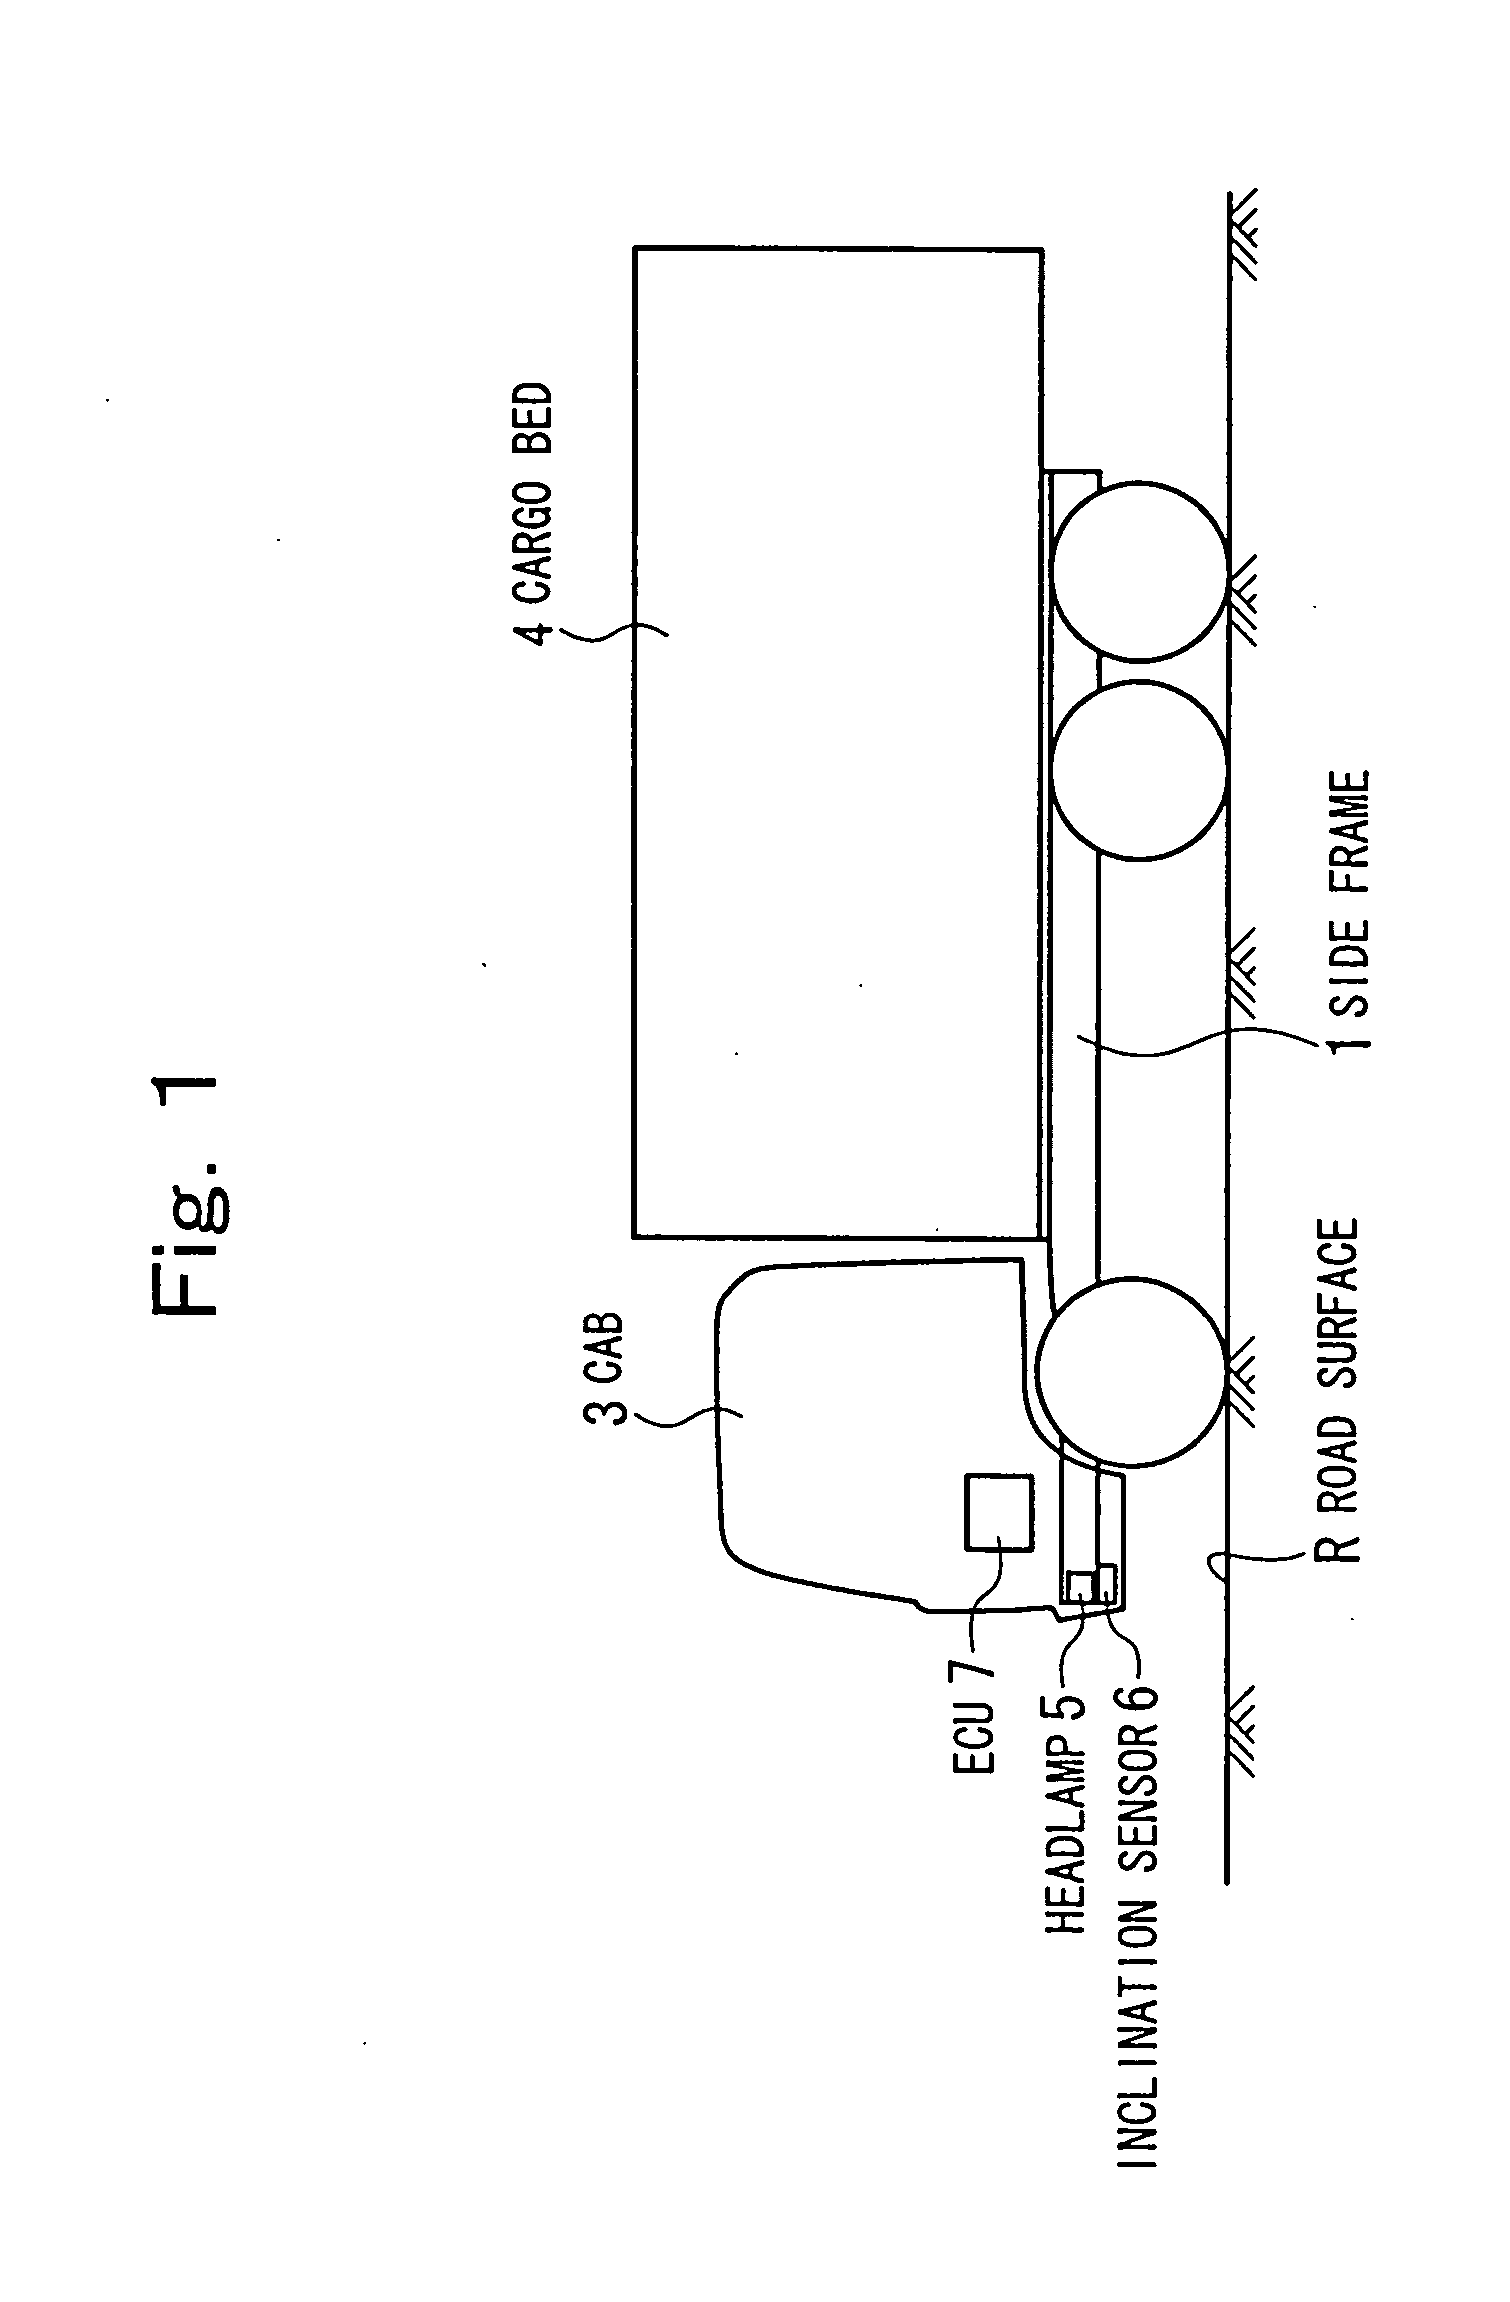 Optical axis control device for vehicle headlamp